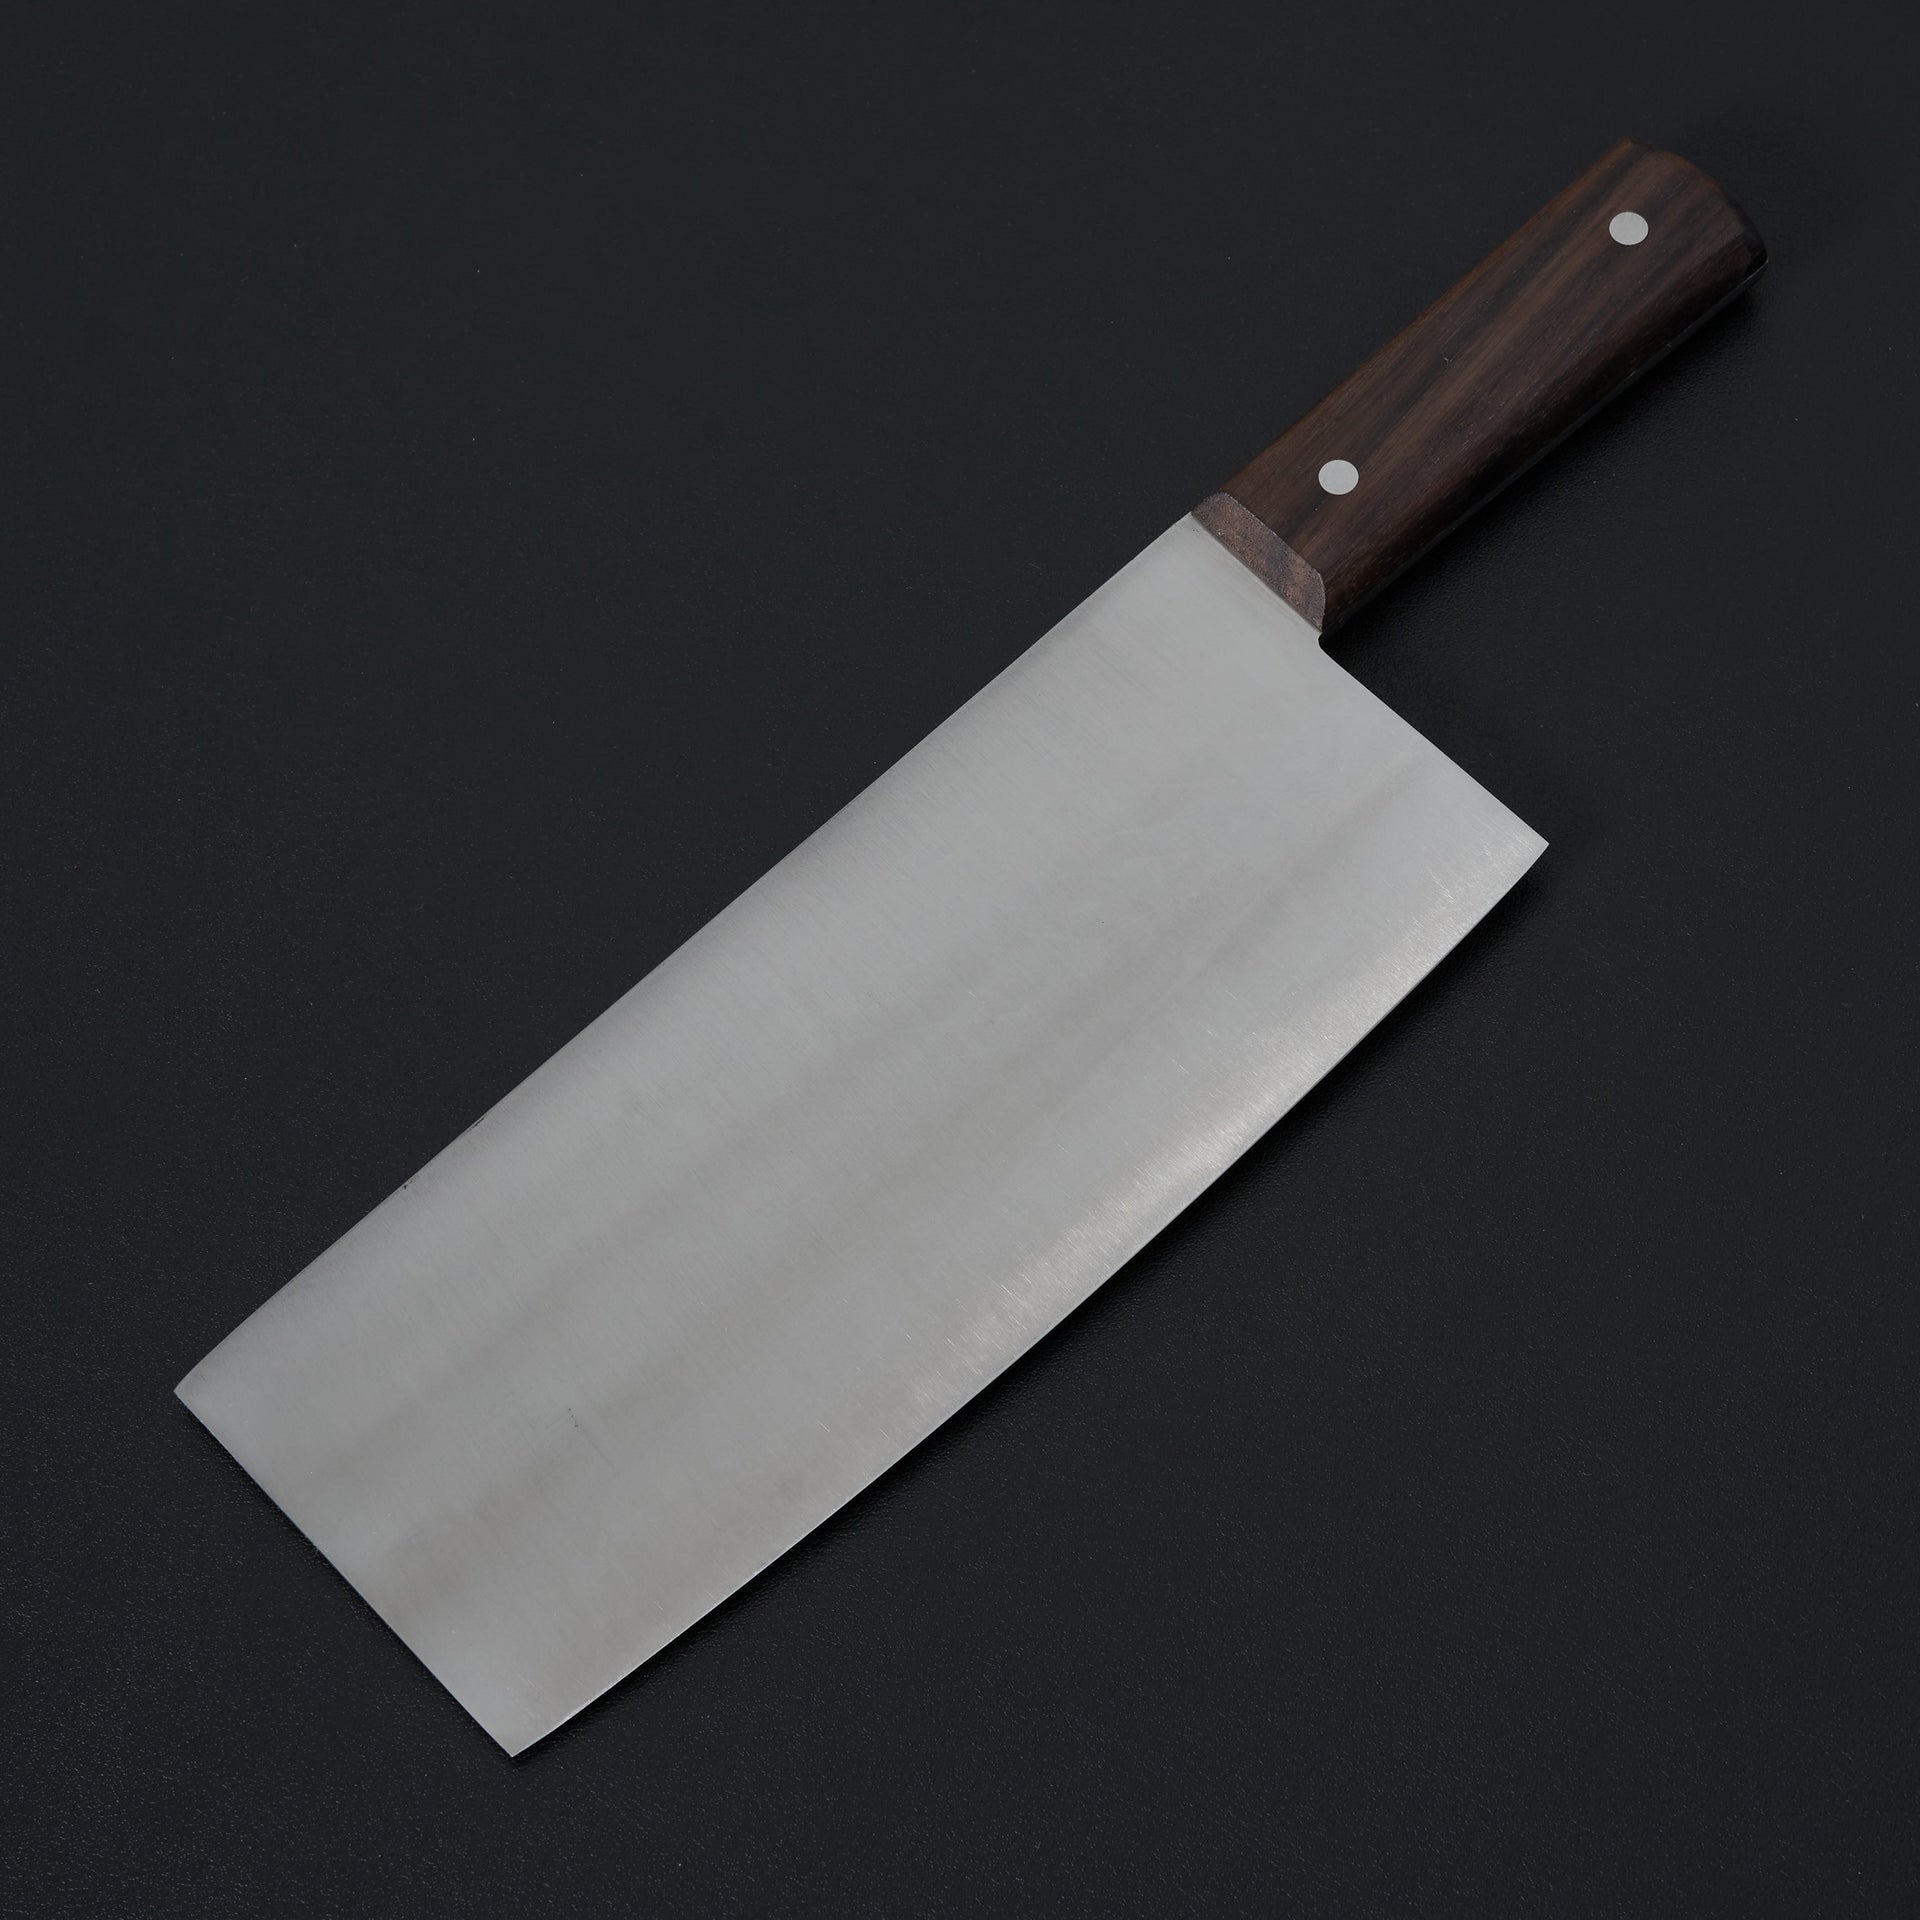 Hitohira Nihonko Carbon Chinese Cleaver 220mm Rosewood Handle-Knife-Hitohira-Carbon Knife Co